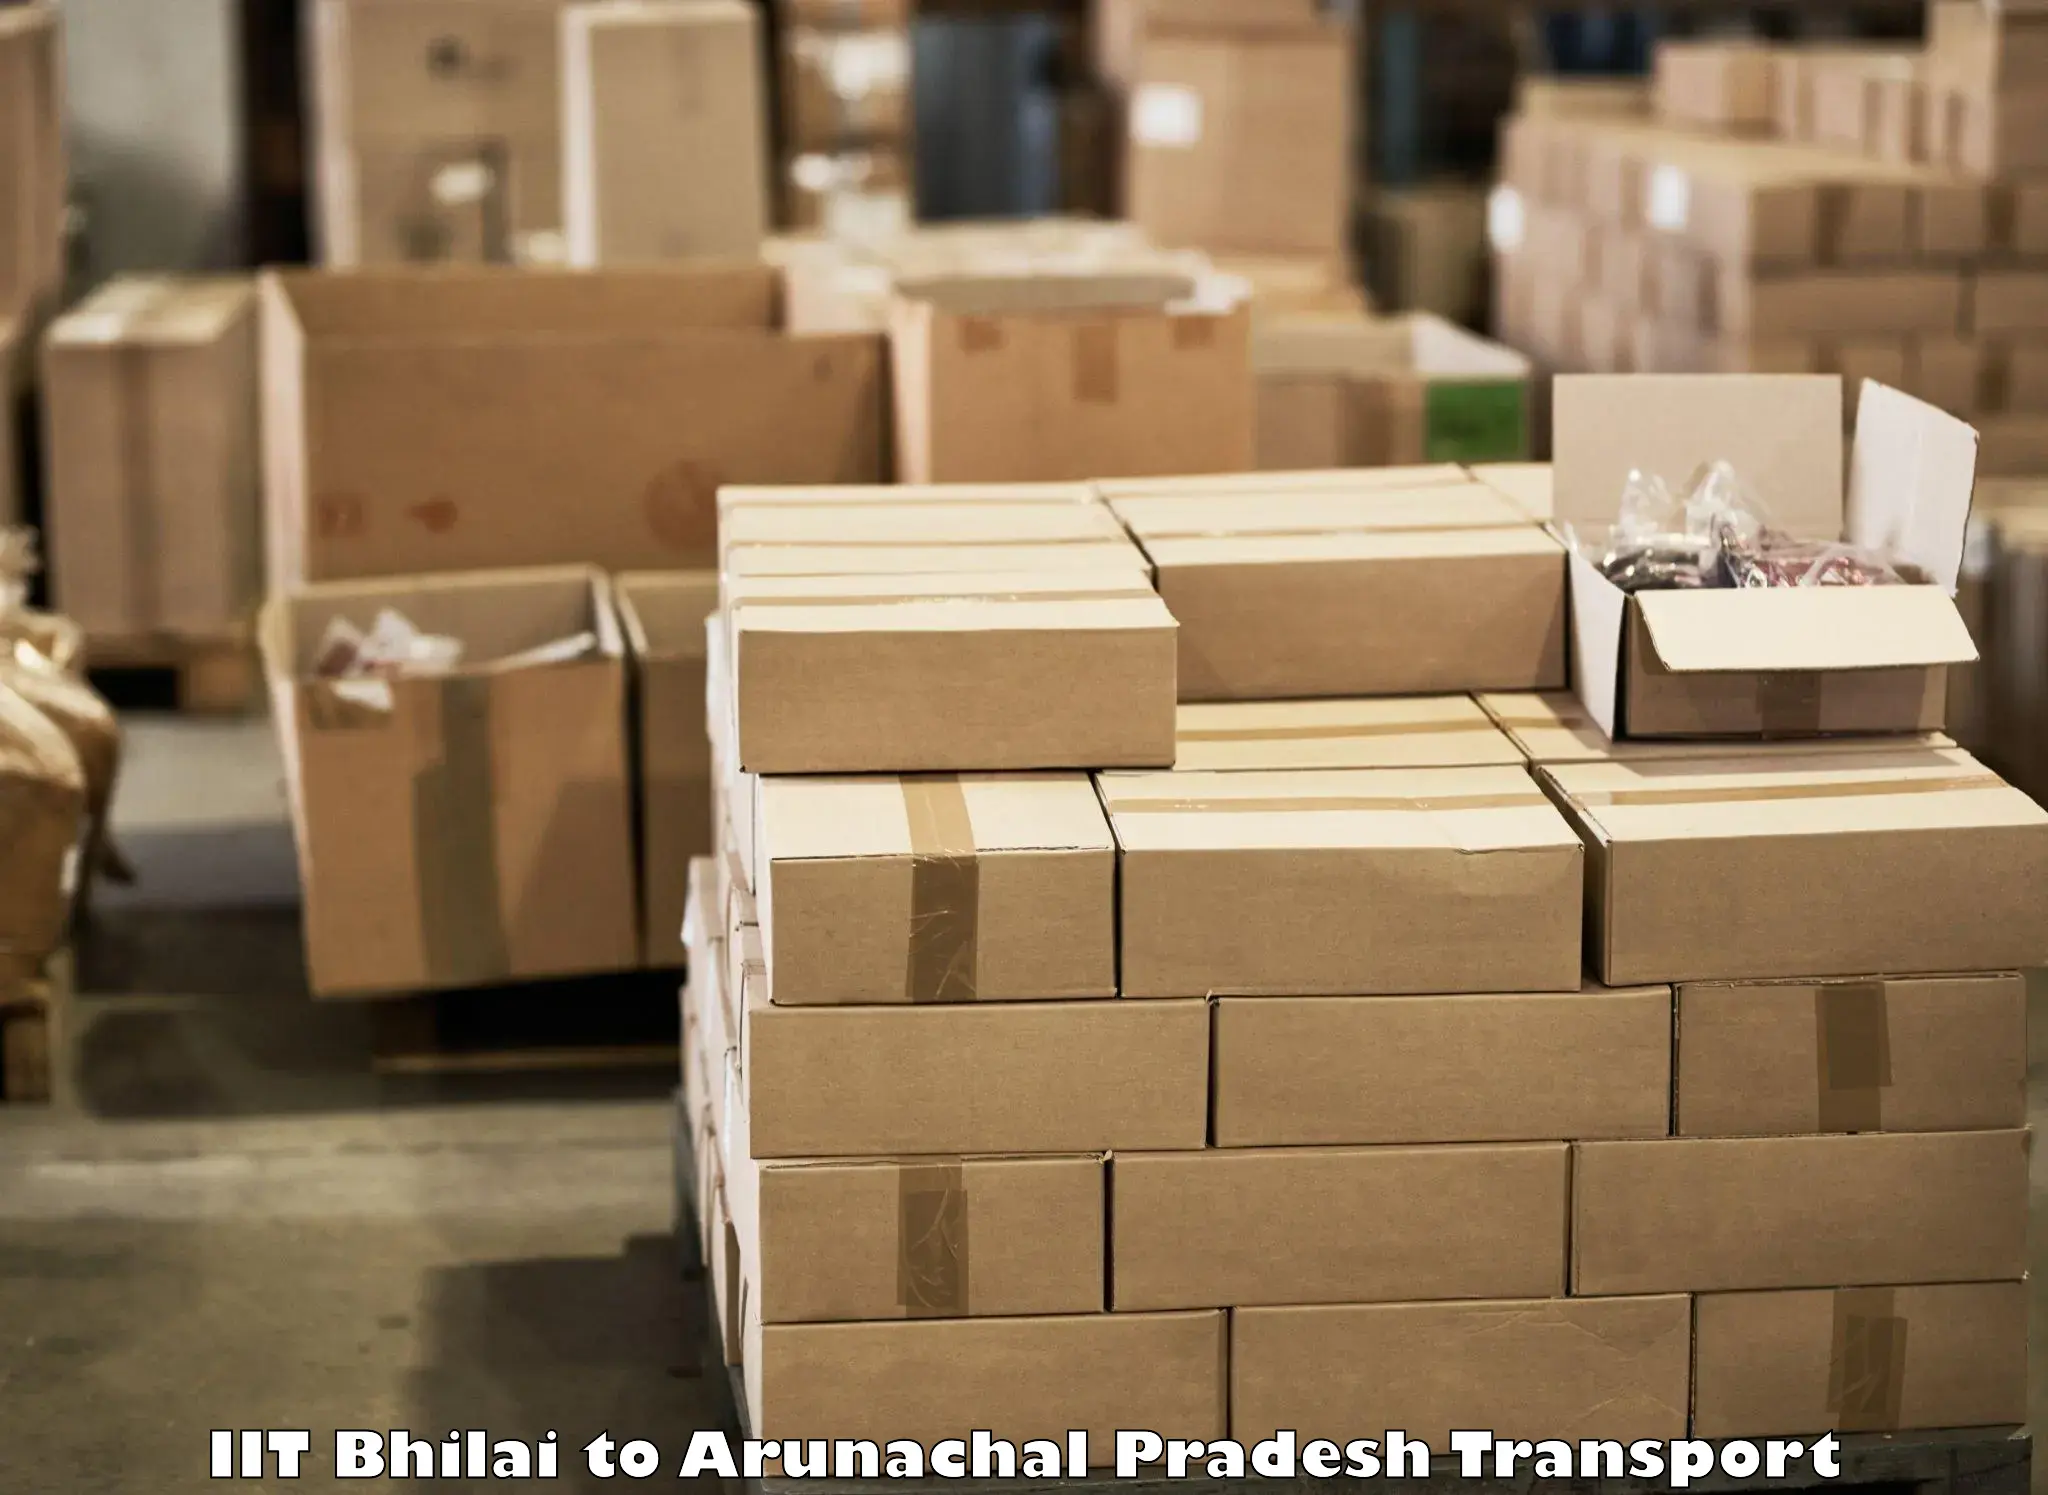 Goods transport services in IIT Bhilai to Deomali